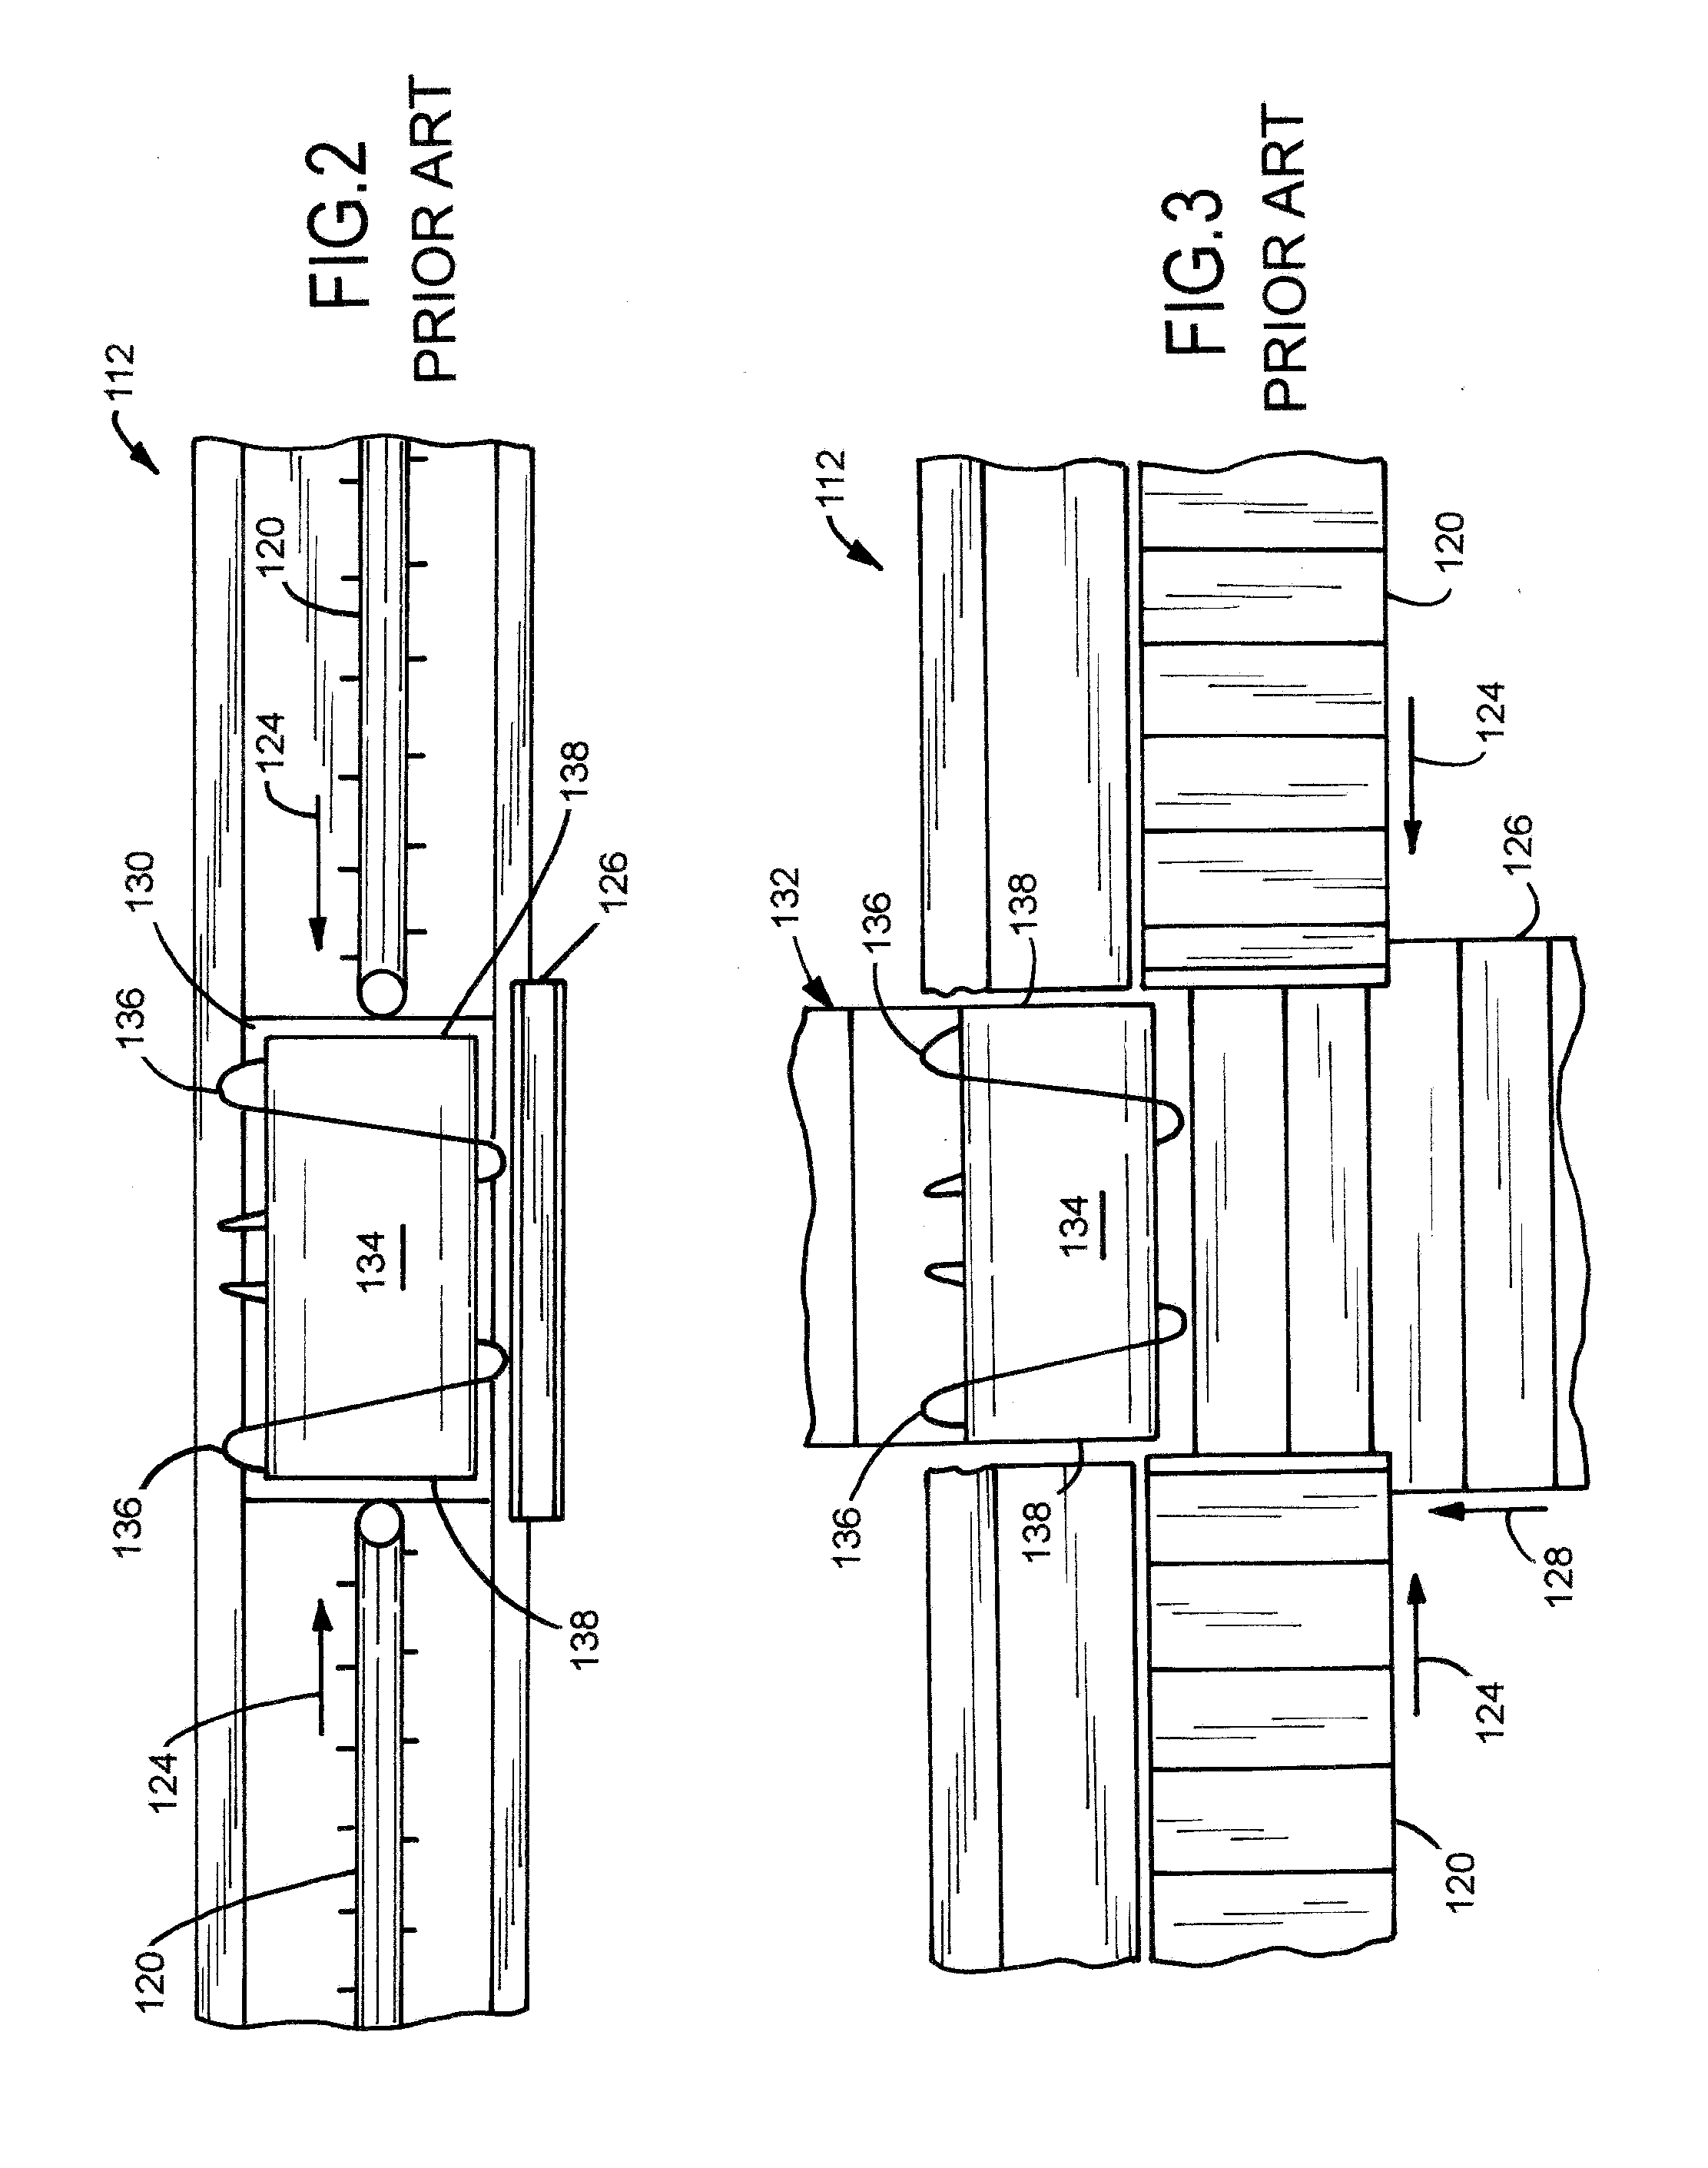 Dual conveyor infeed for a header of an agricultural harvester